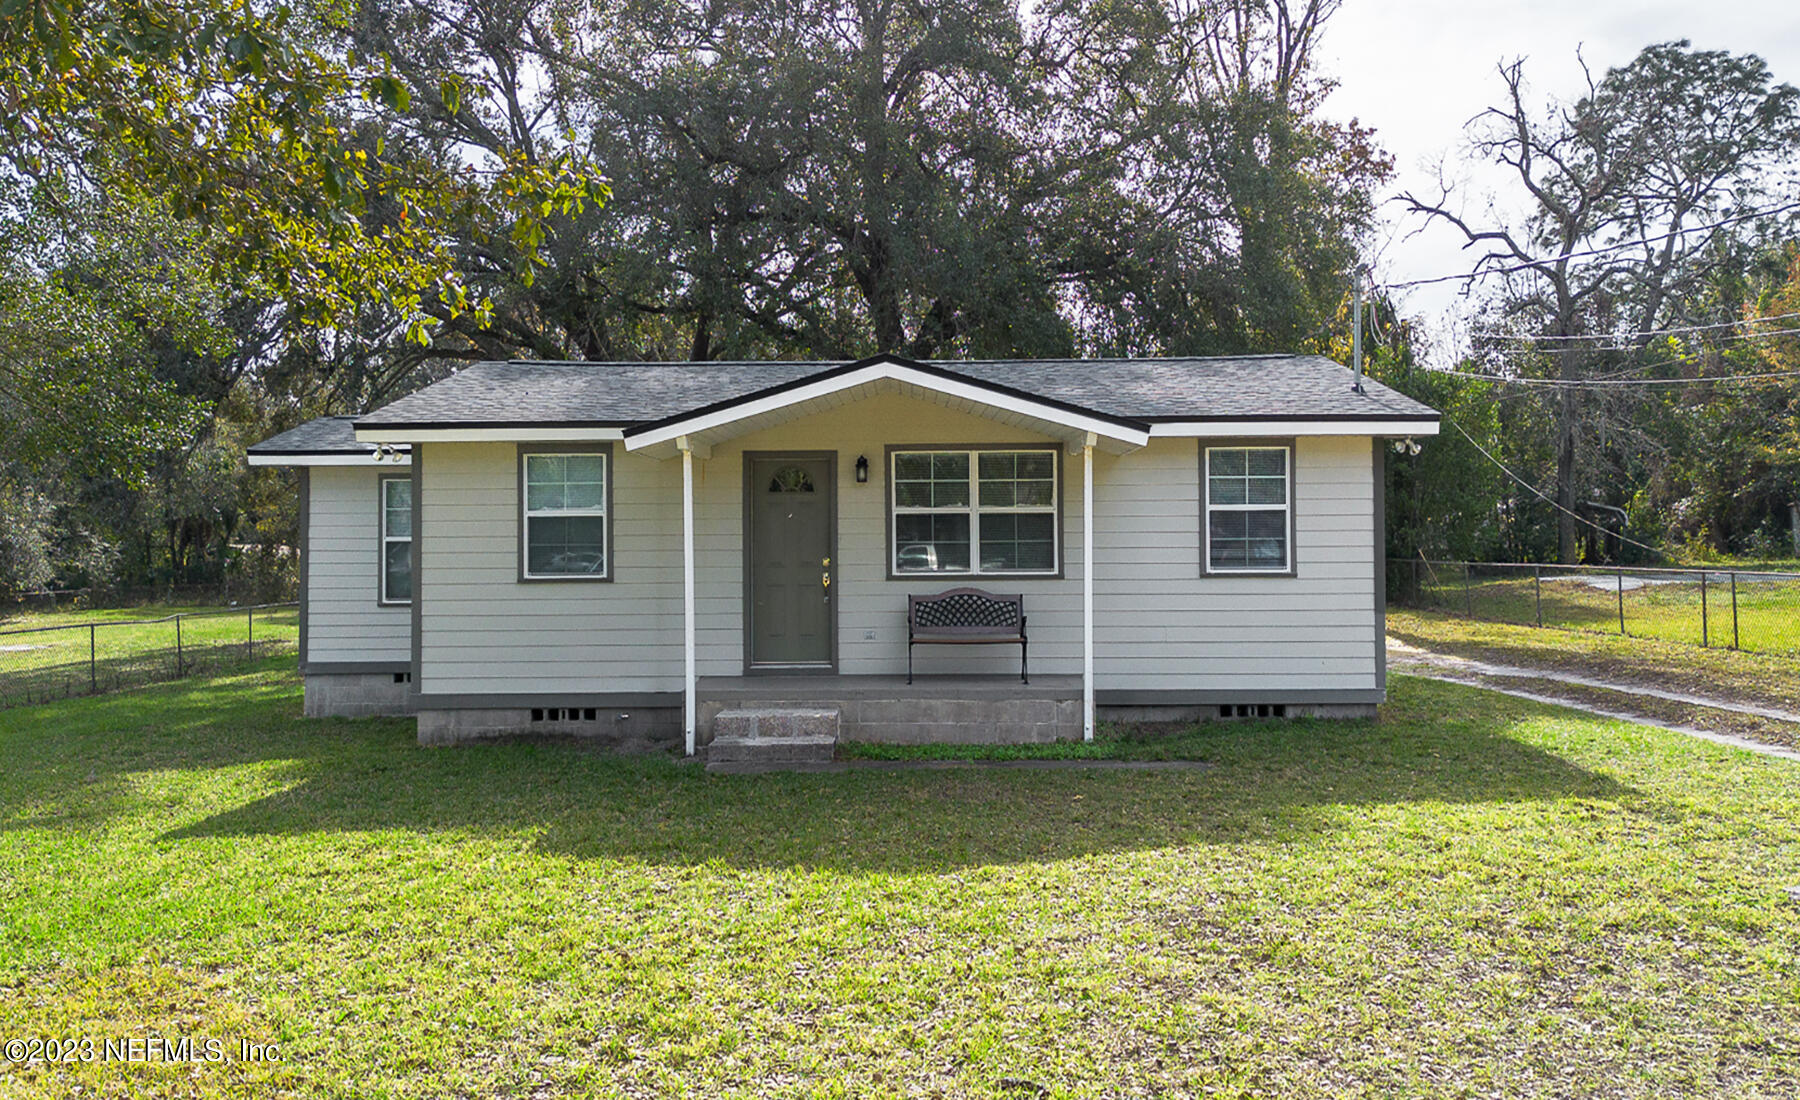 Jacksonville, FL home for sale located at 7244 118TH Street, Jacksonville, FL 32244